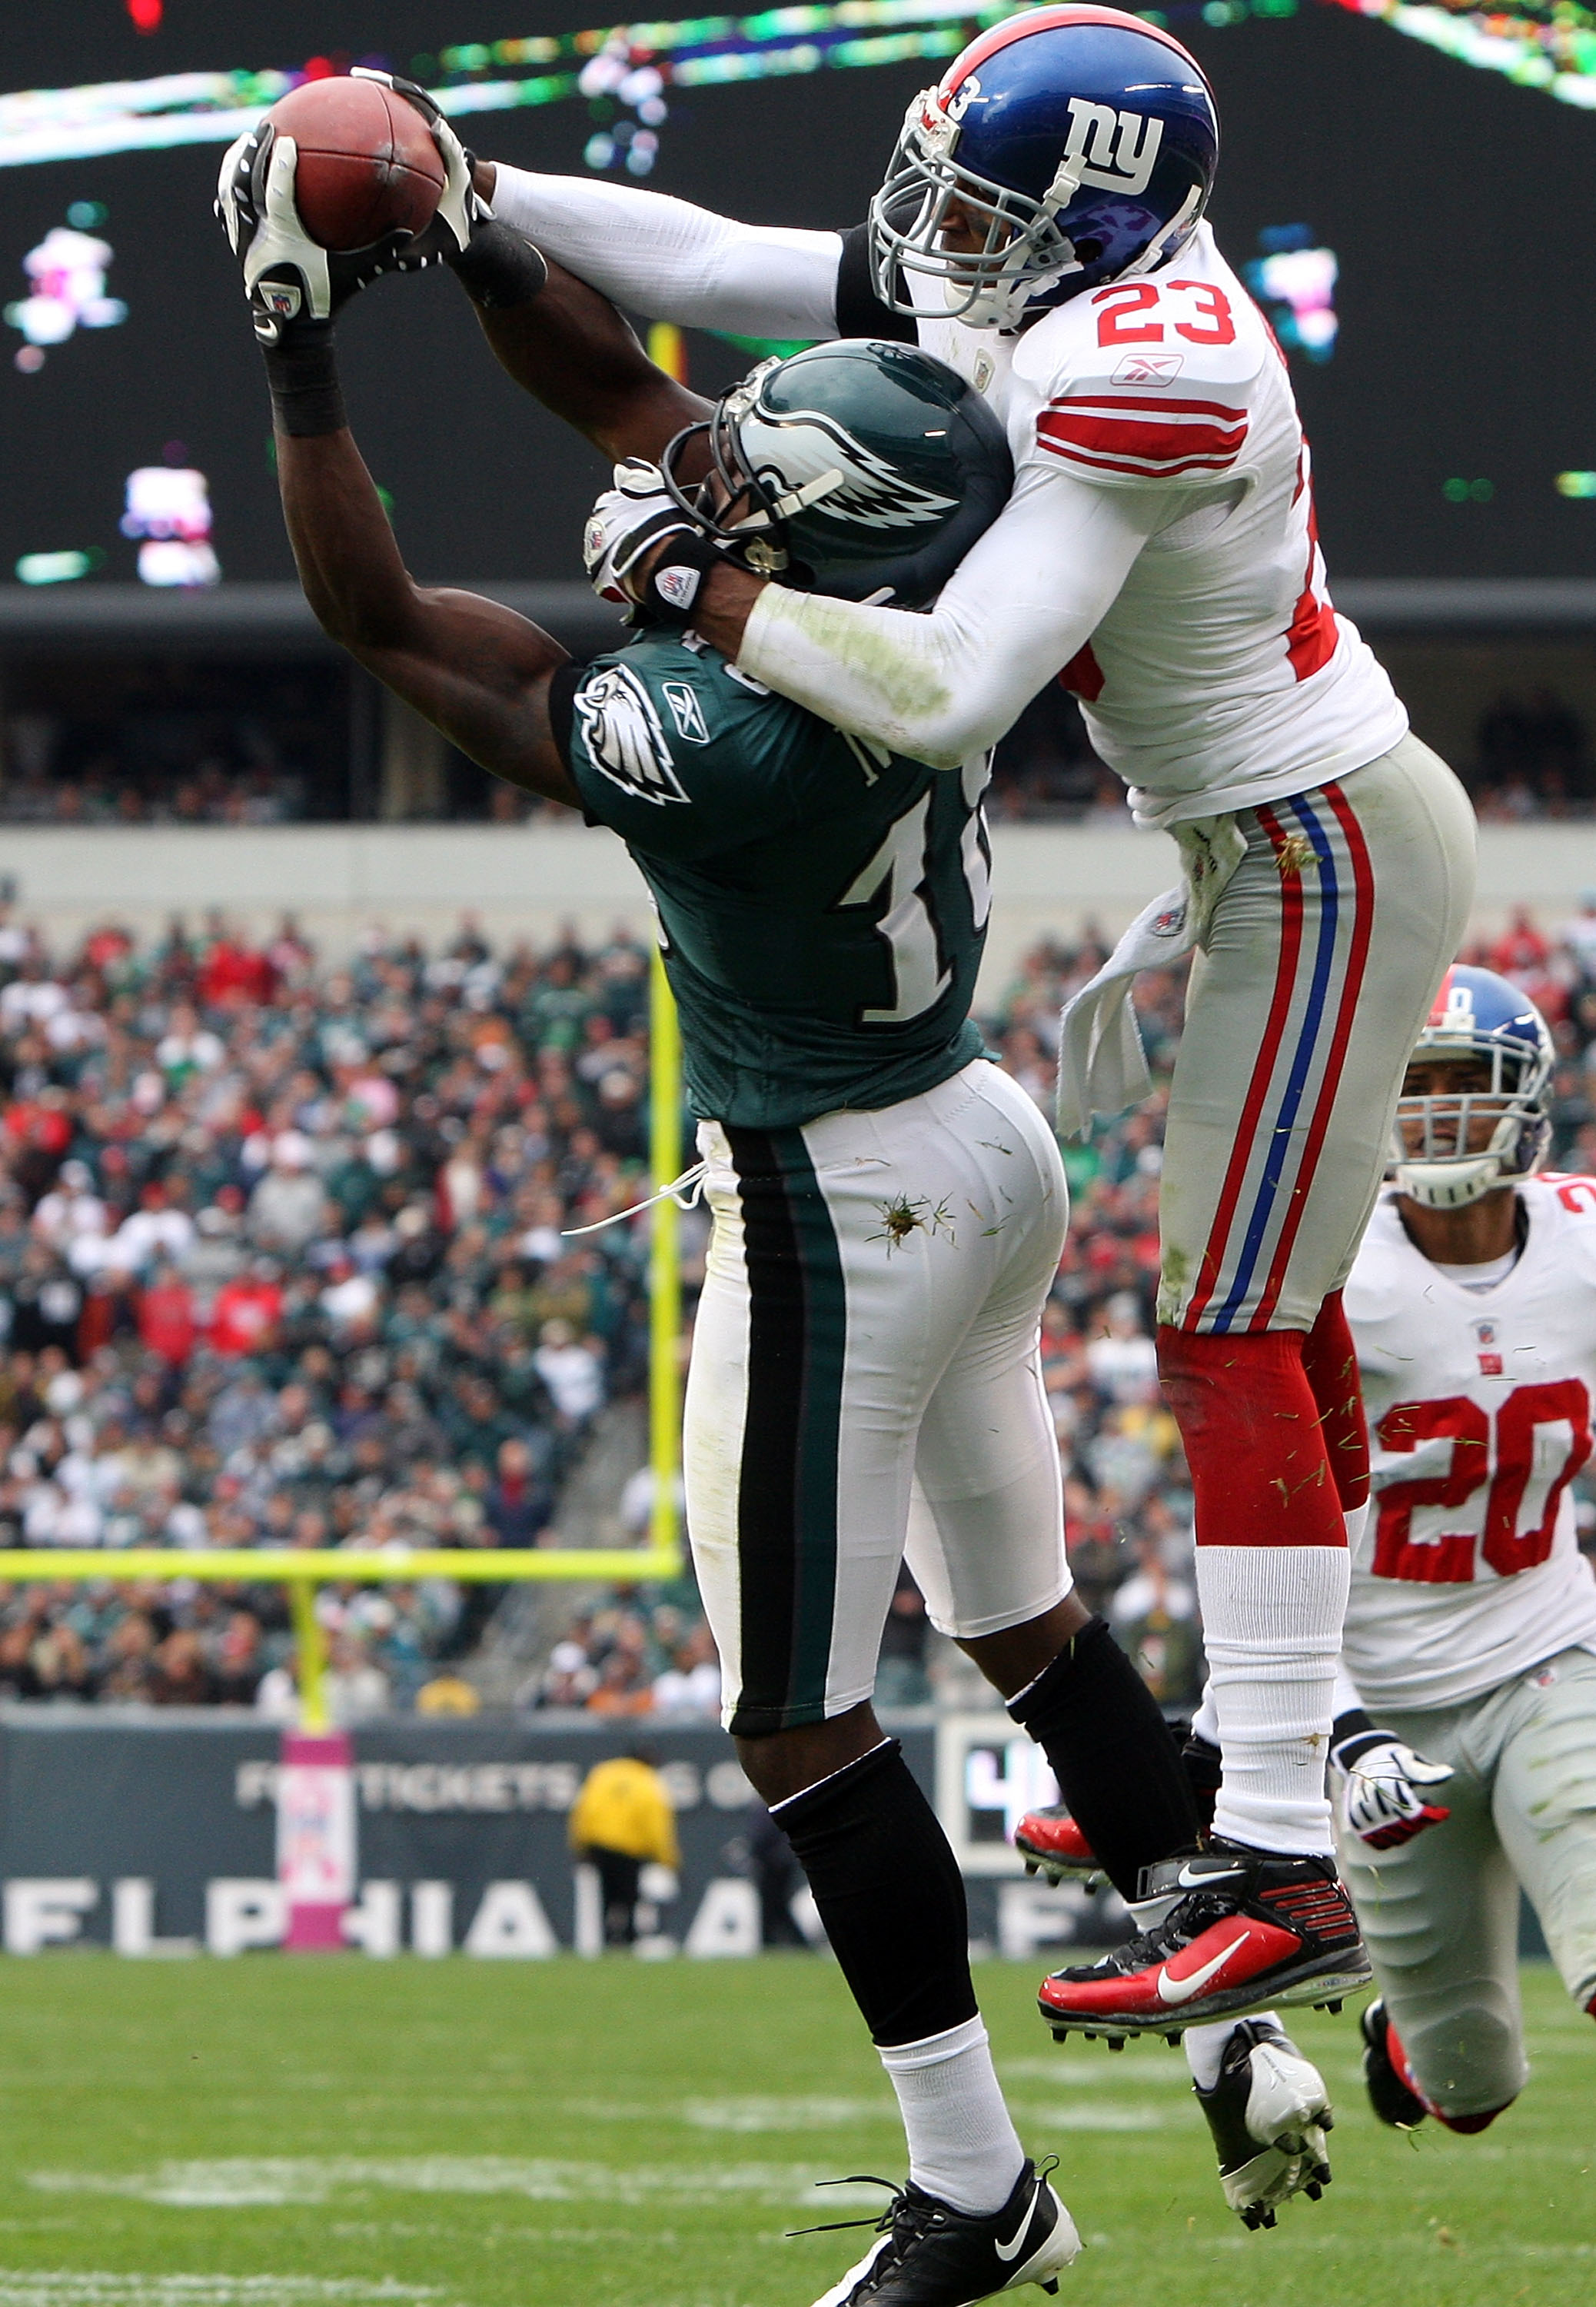 PHILADELPHIA - NOVEMBER 01:  Jeremy Maclin #18 of the Philadelphia Eagles makes a catch for a second quarter touchdown against Corey Webster #23 of the New York Giants on November 1, 2009 at Lincoln Financial Field in Philadelphia, Pennsylvania.  (Photo b